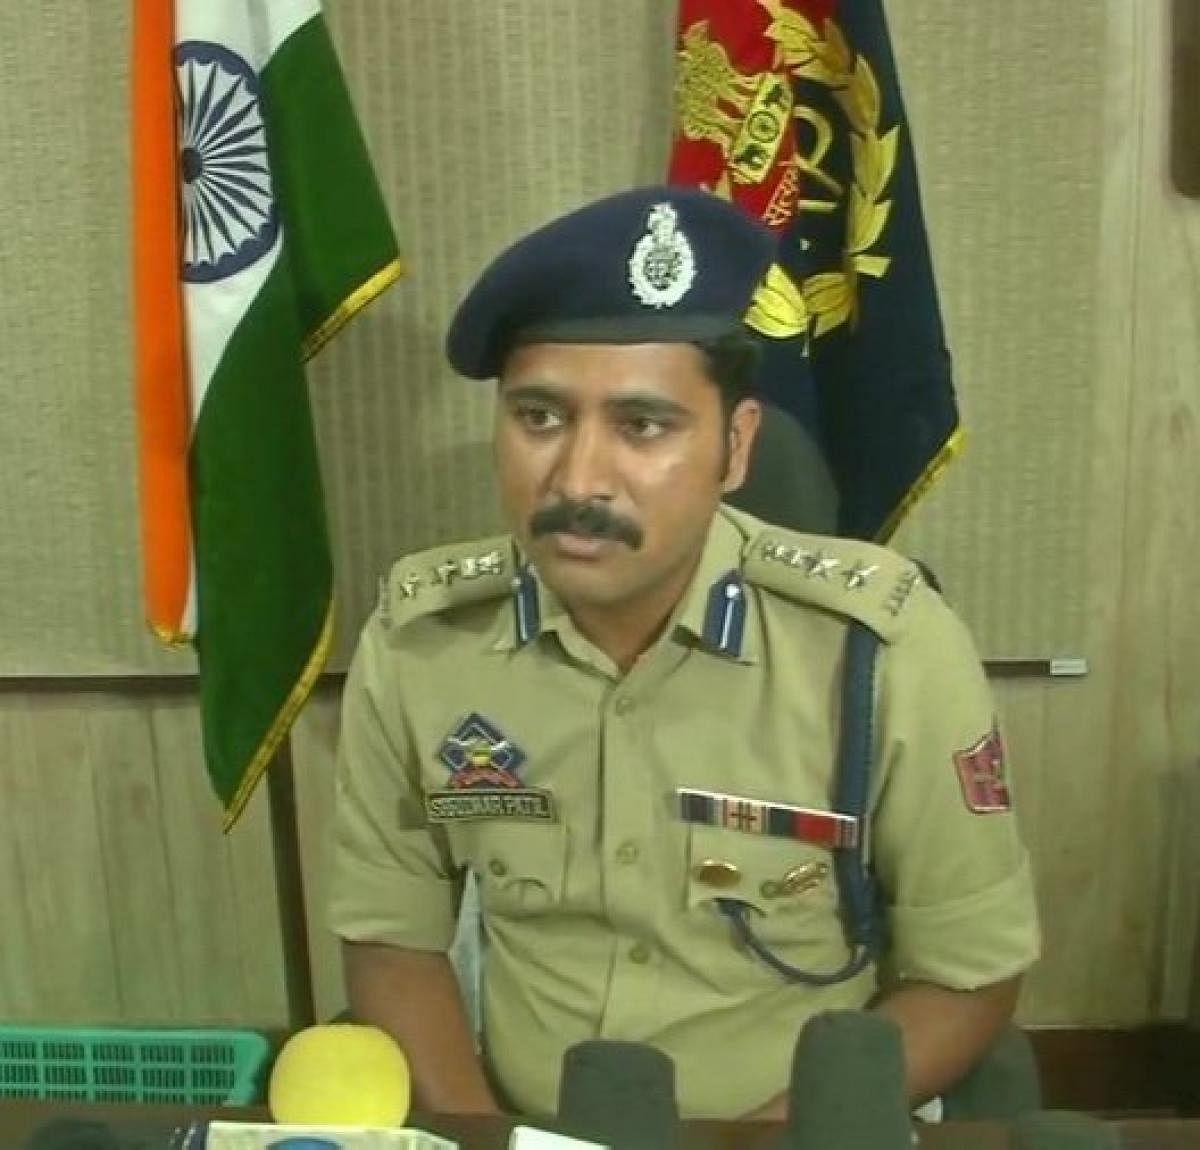 Senior Superintendent of Police Kathua said they were illegally transporting arms and ammunition to Kashmir from Punjab to "disturb peace in the Valley". Photo/Twitter